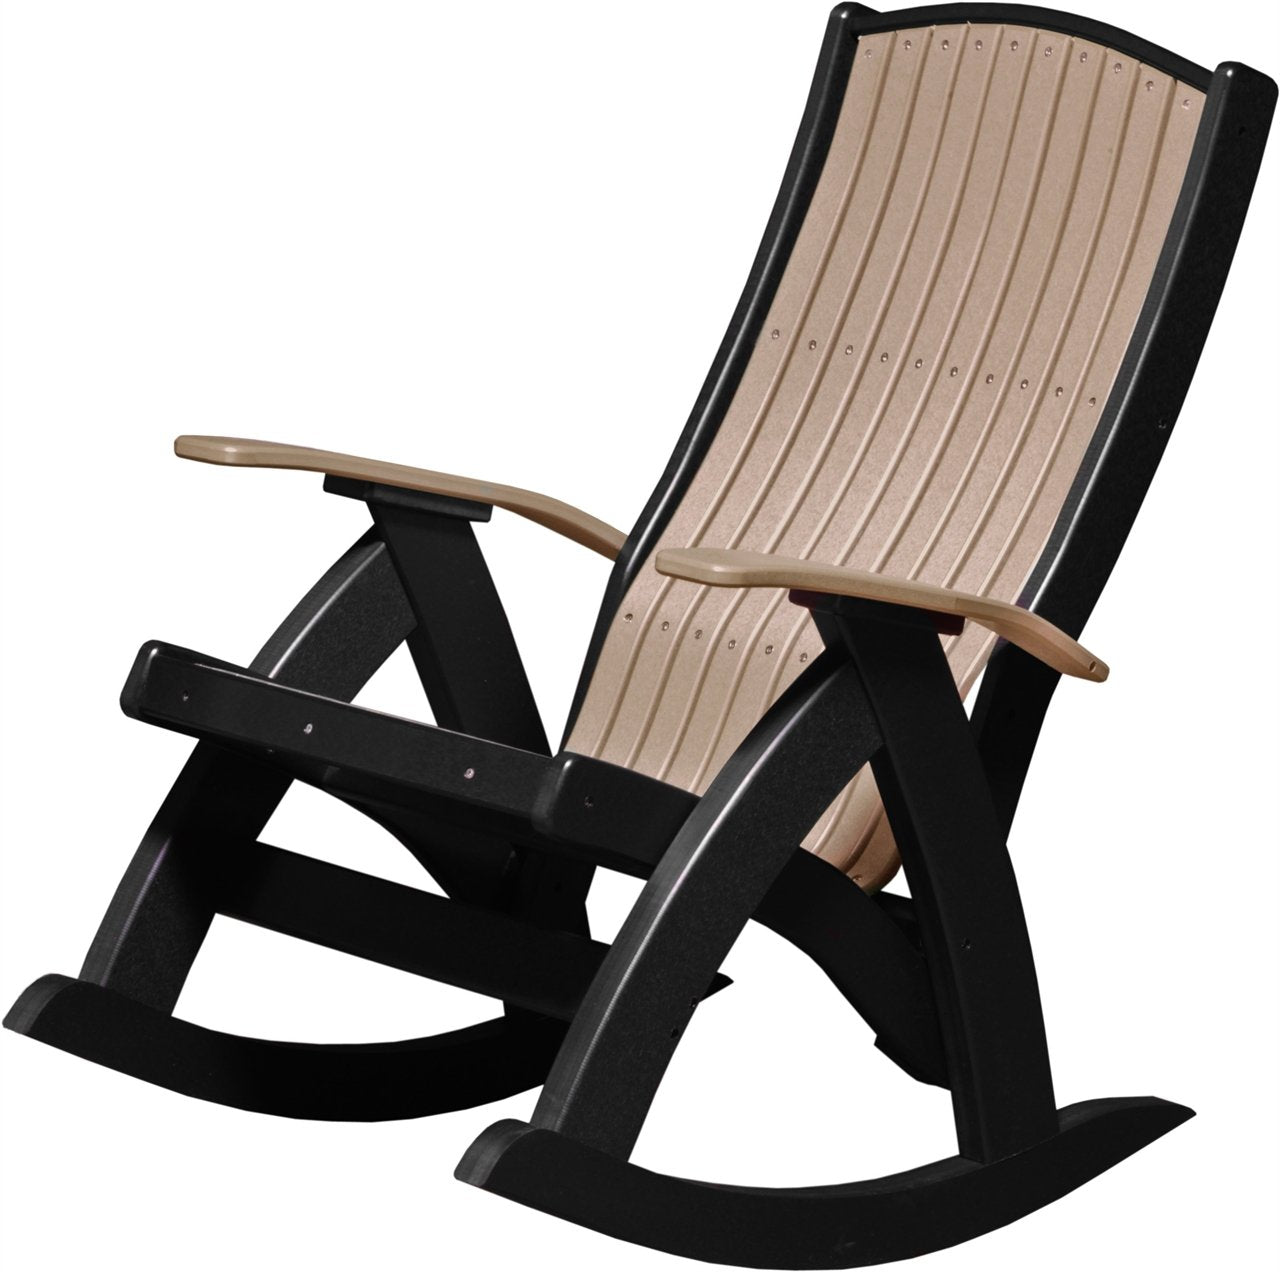 Another New Product: Poly Comfort Rocking Chair